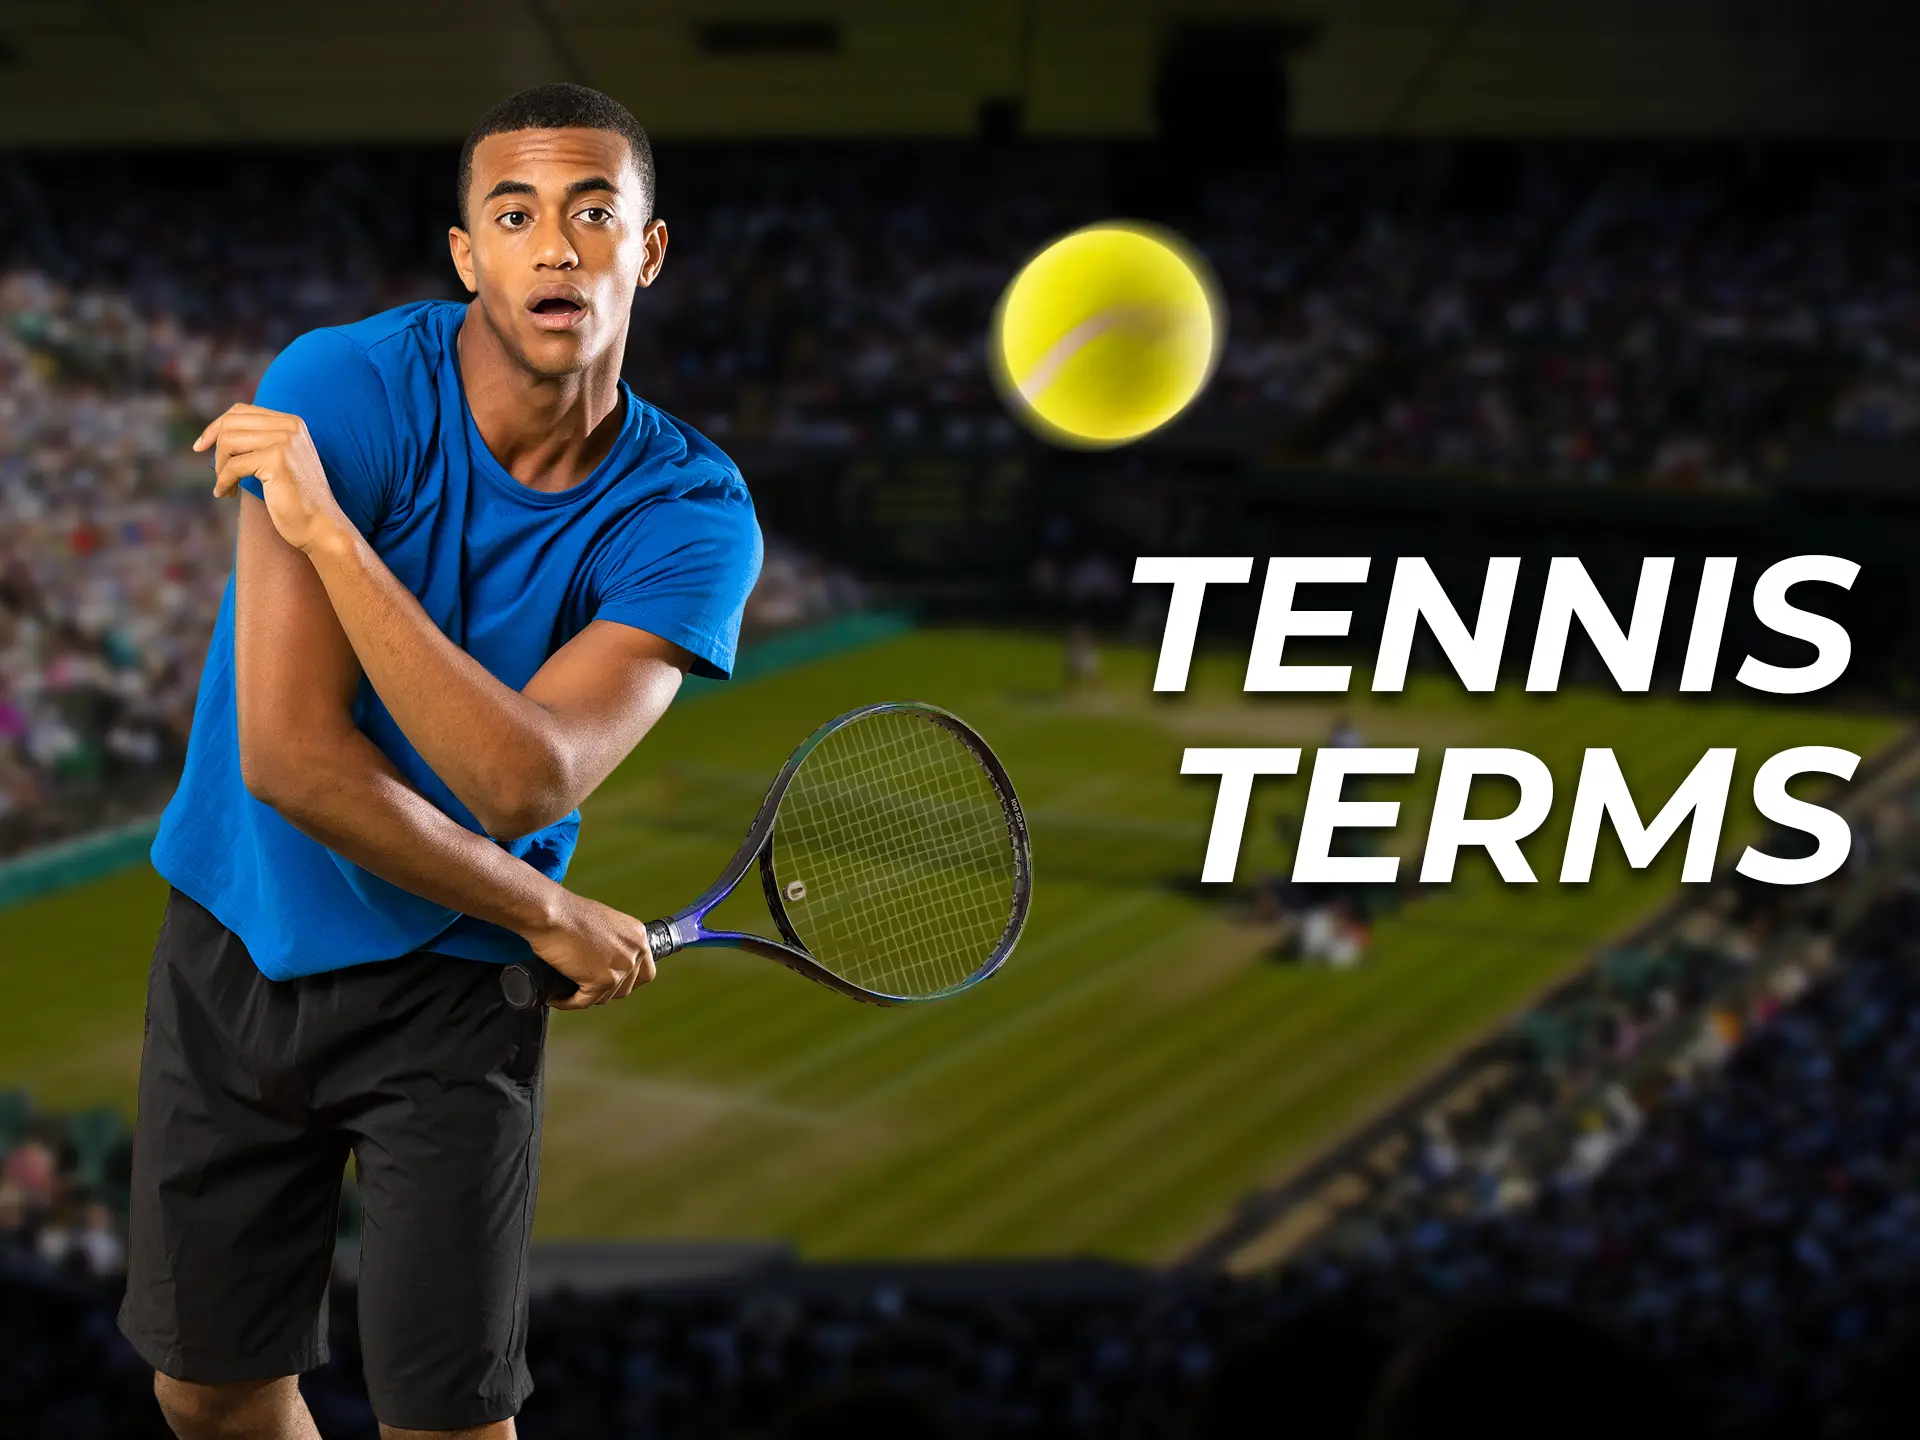 Common terms for tennis matches.